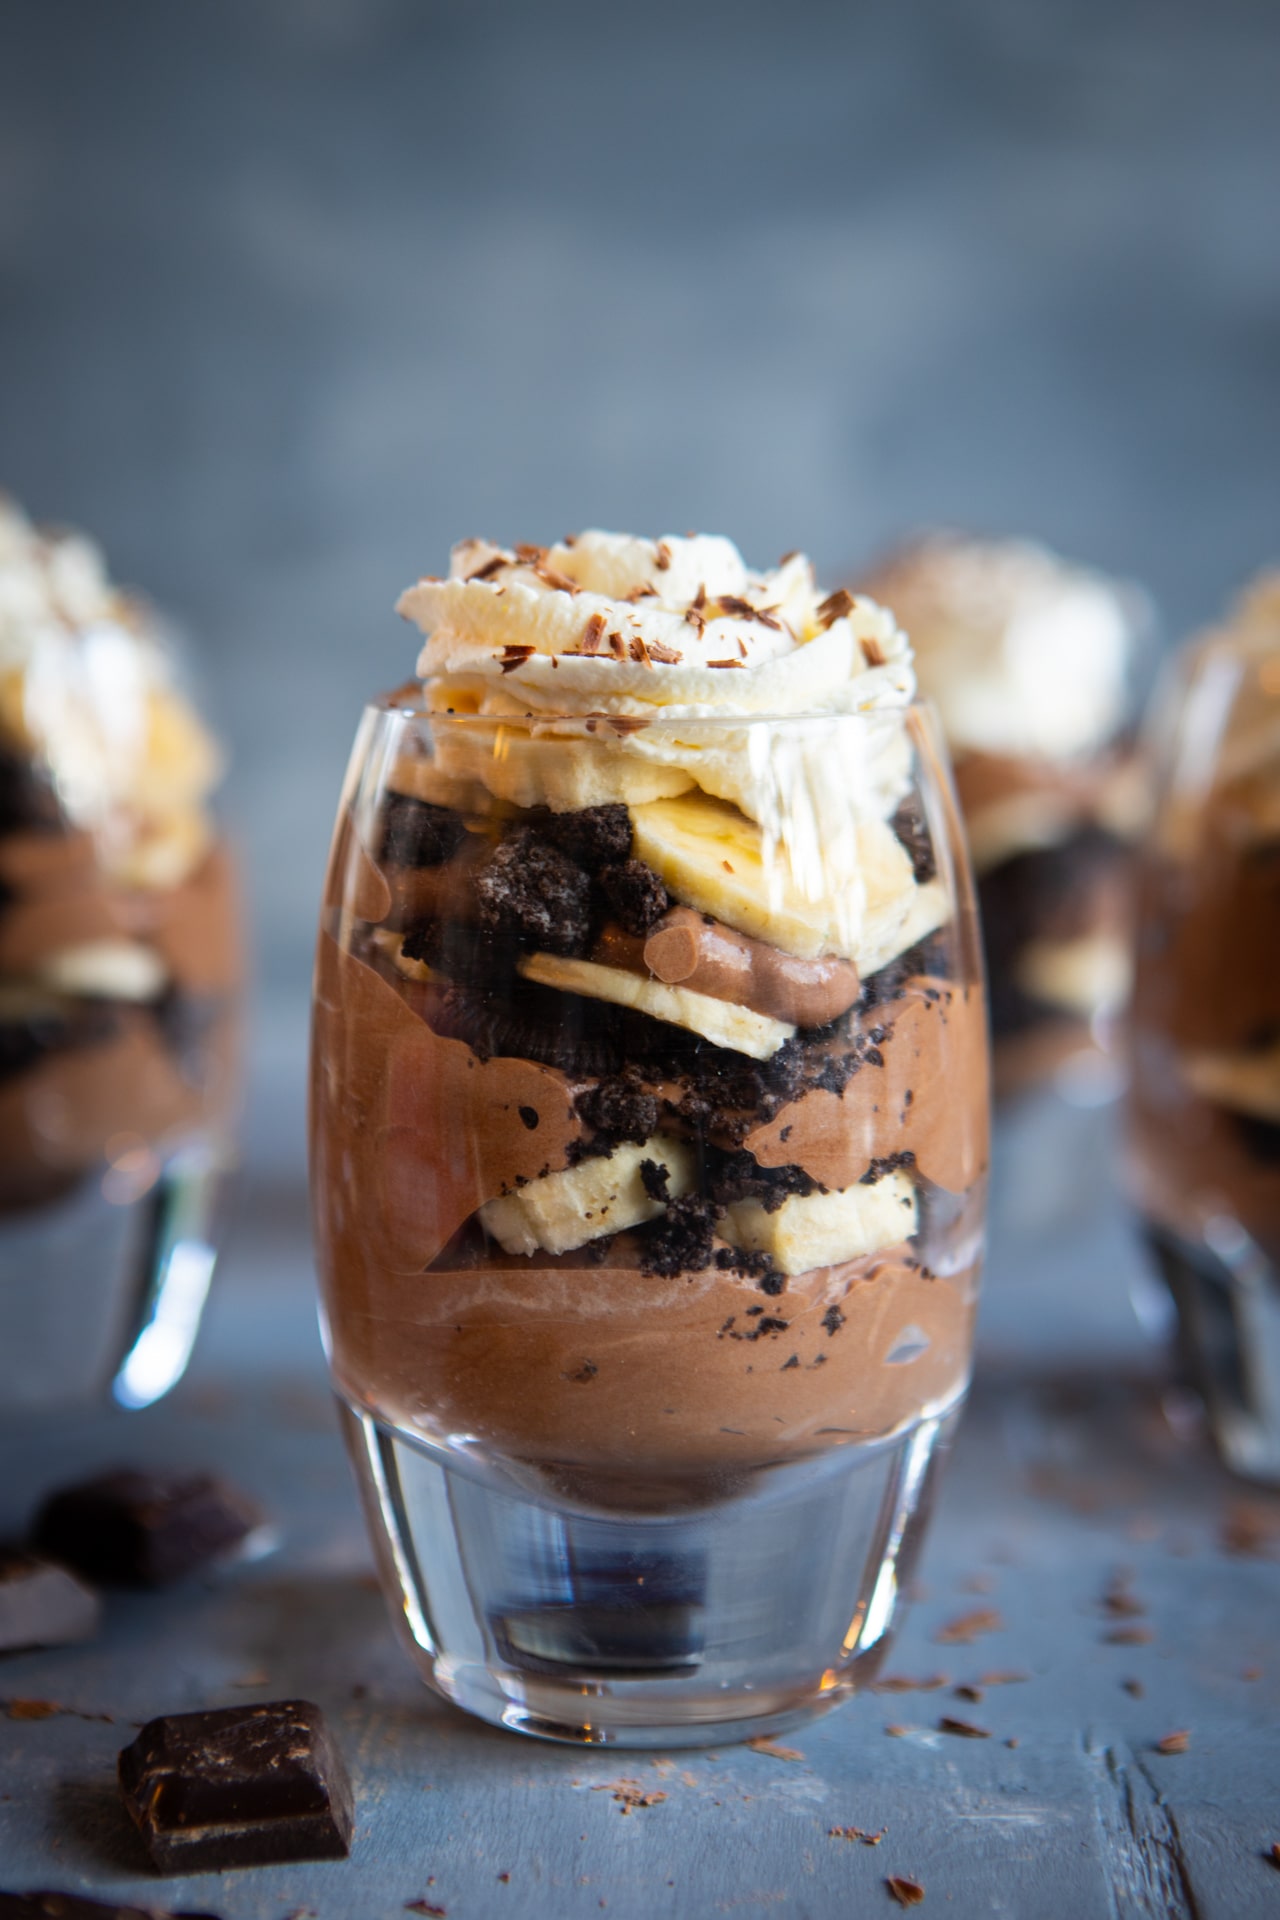 4 glasses of Chocolate Banana Pudding, with 3 in the background, blurry, and one in the foreground, in focus, so you can see all the beautiful layers of dessert.